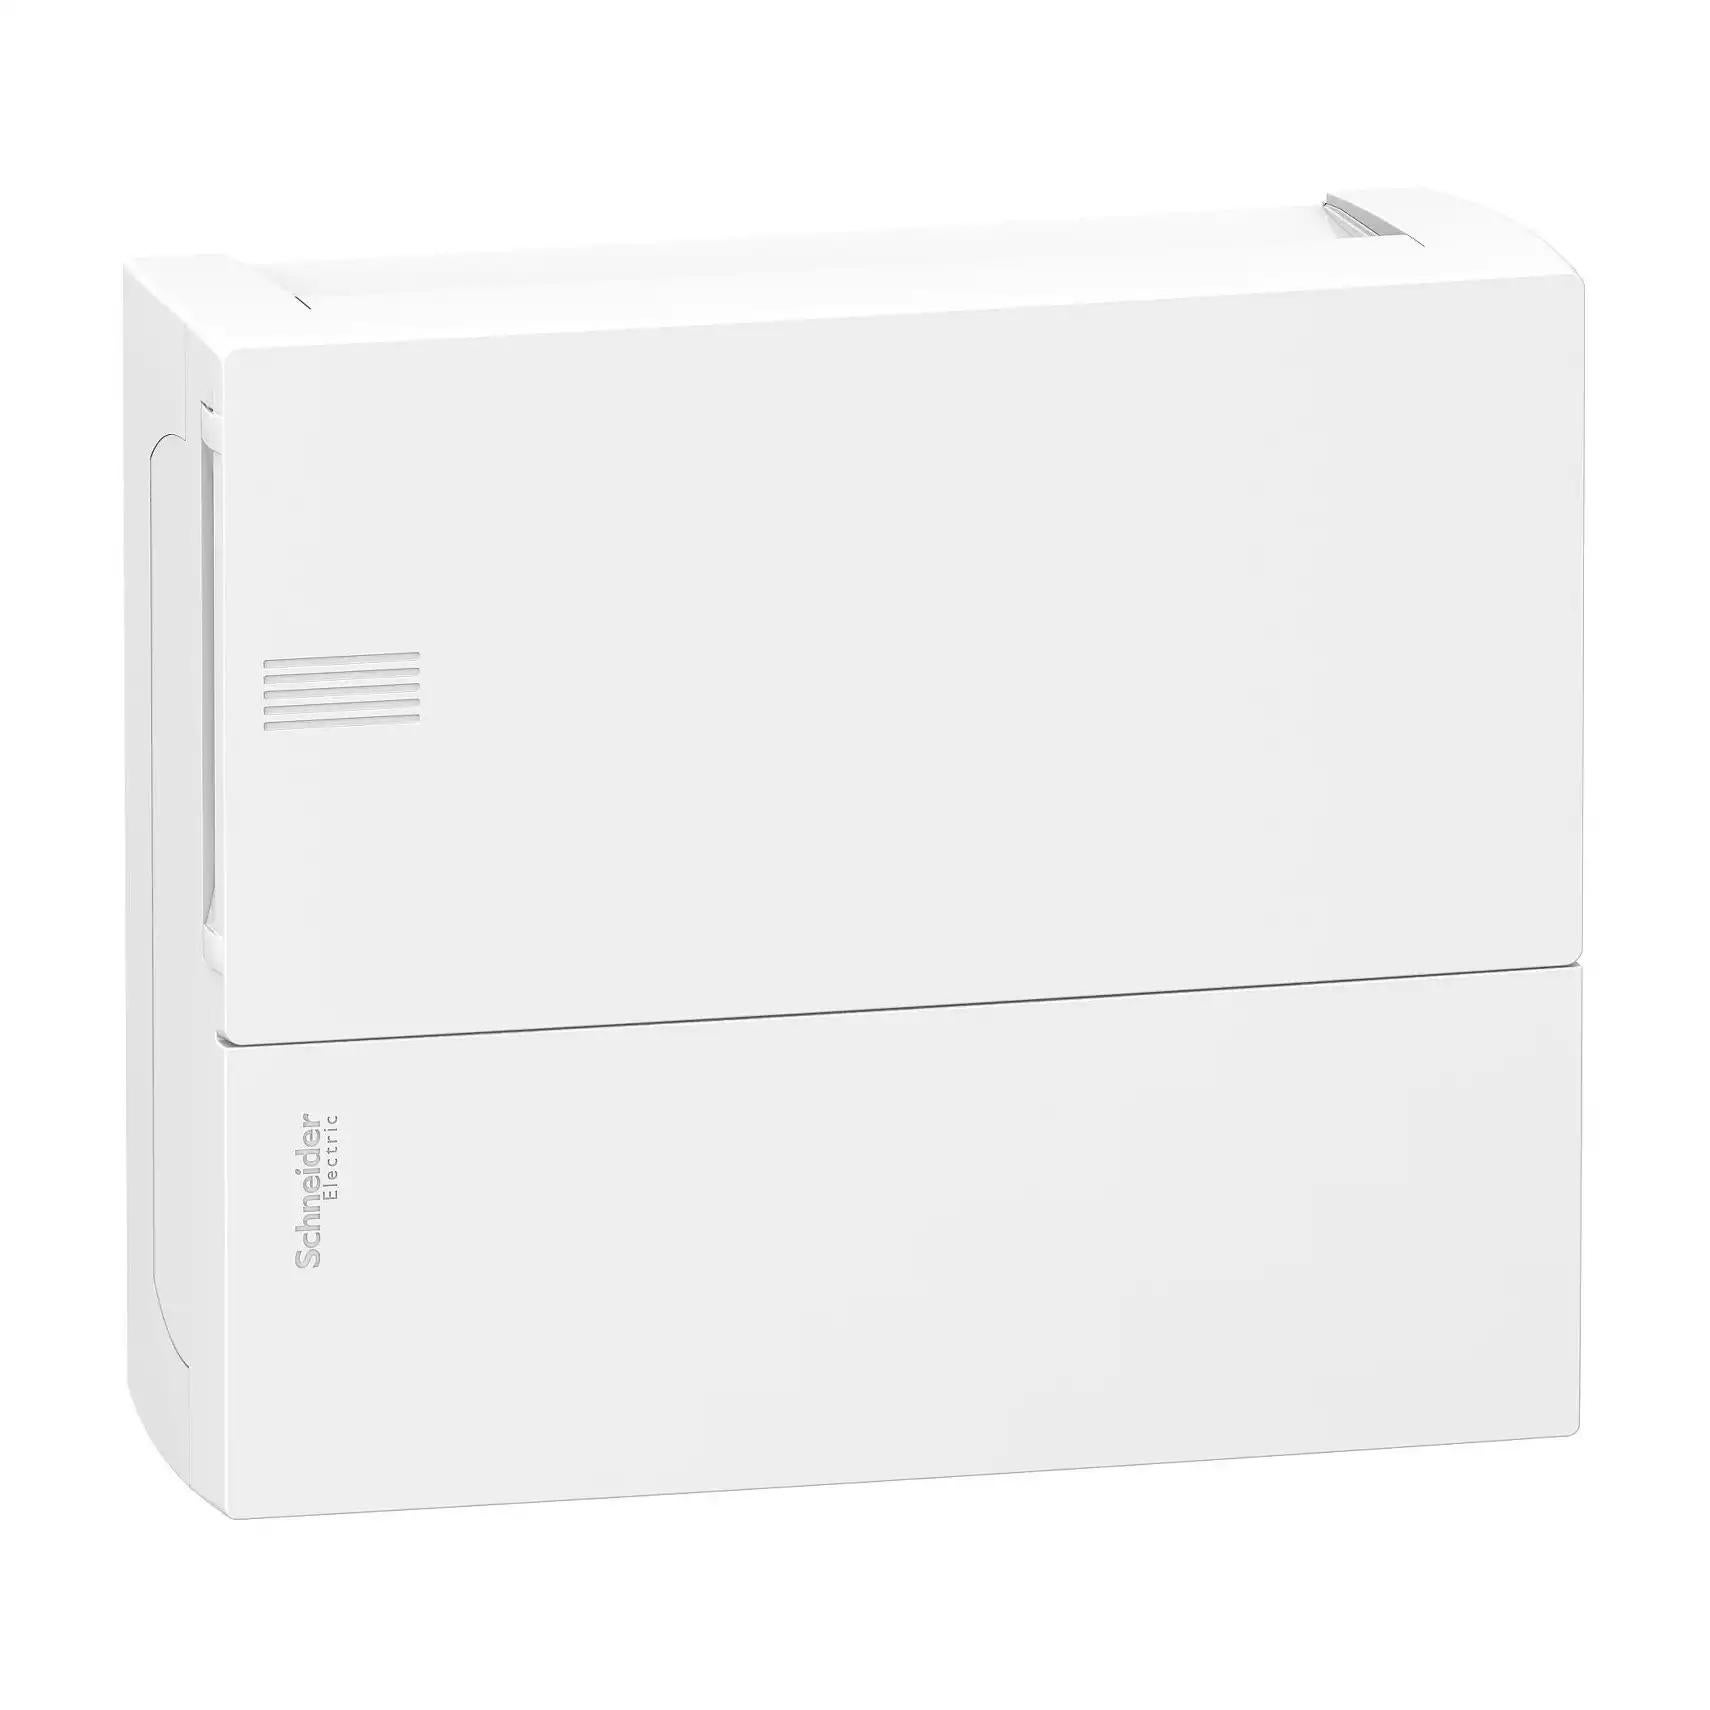 Enclosure, Resi9 MP, surface mounting, 1 row of 12 modules, IP40, white door, 1 earth + 1 neutral terminal blocks